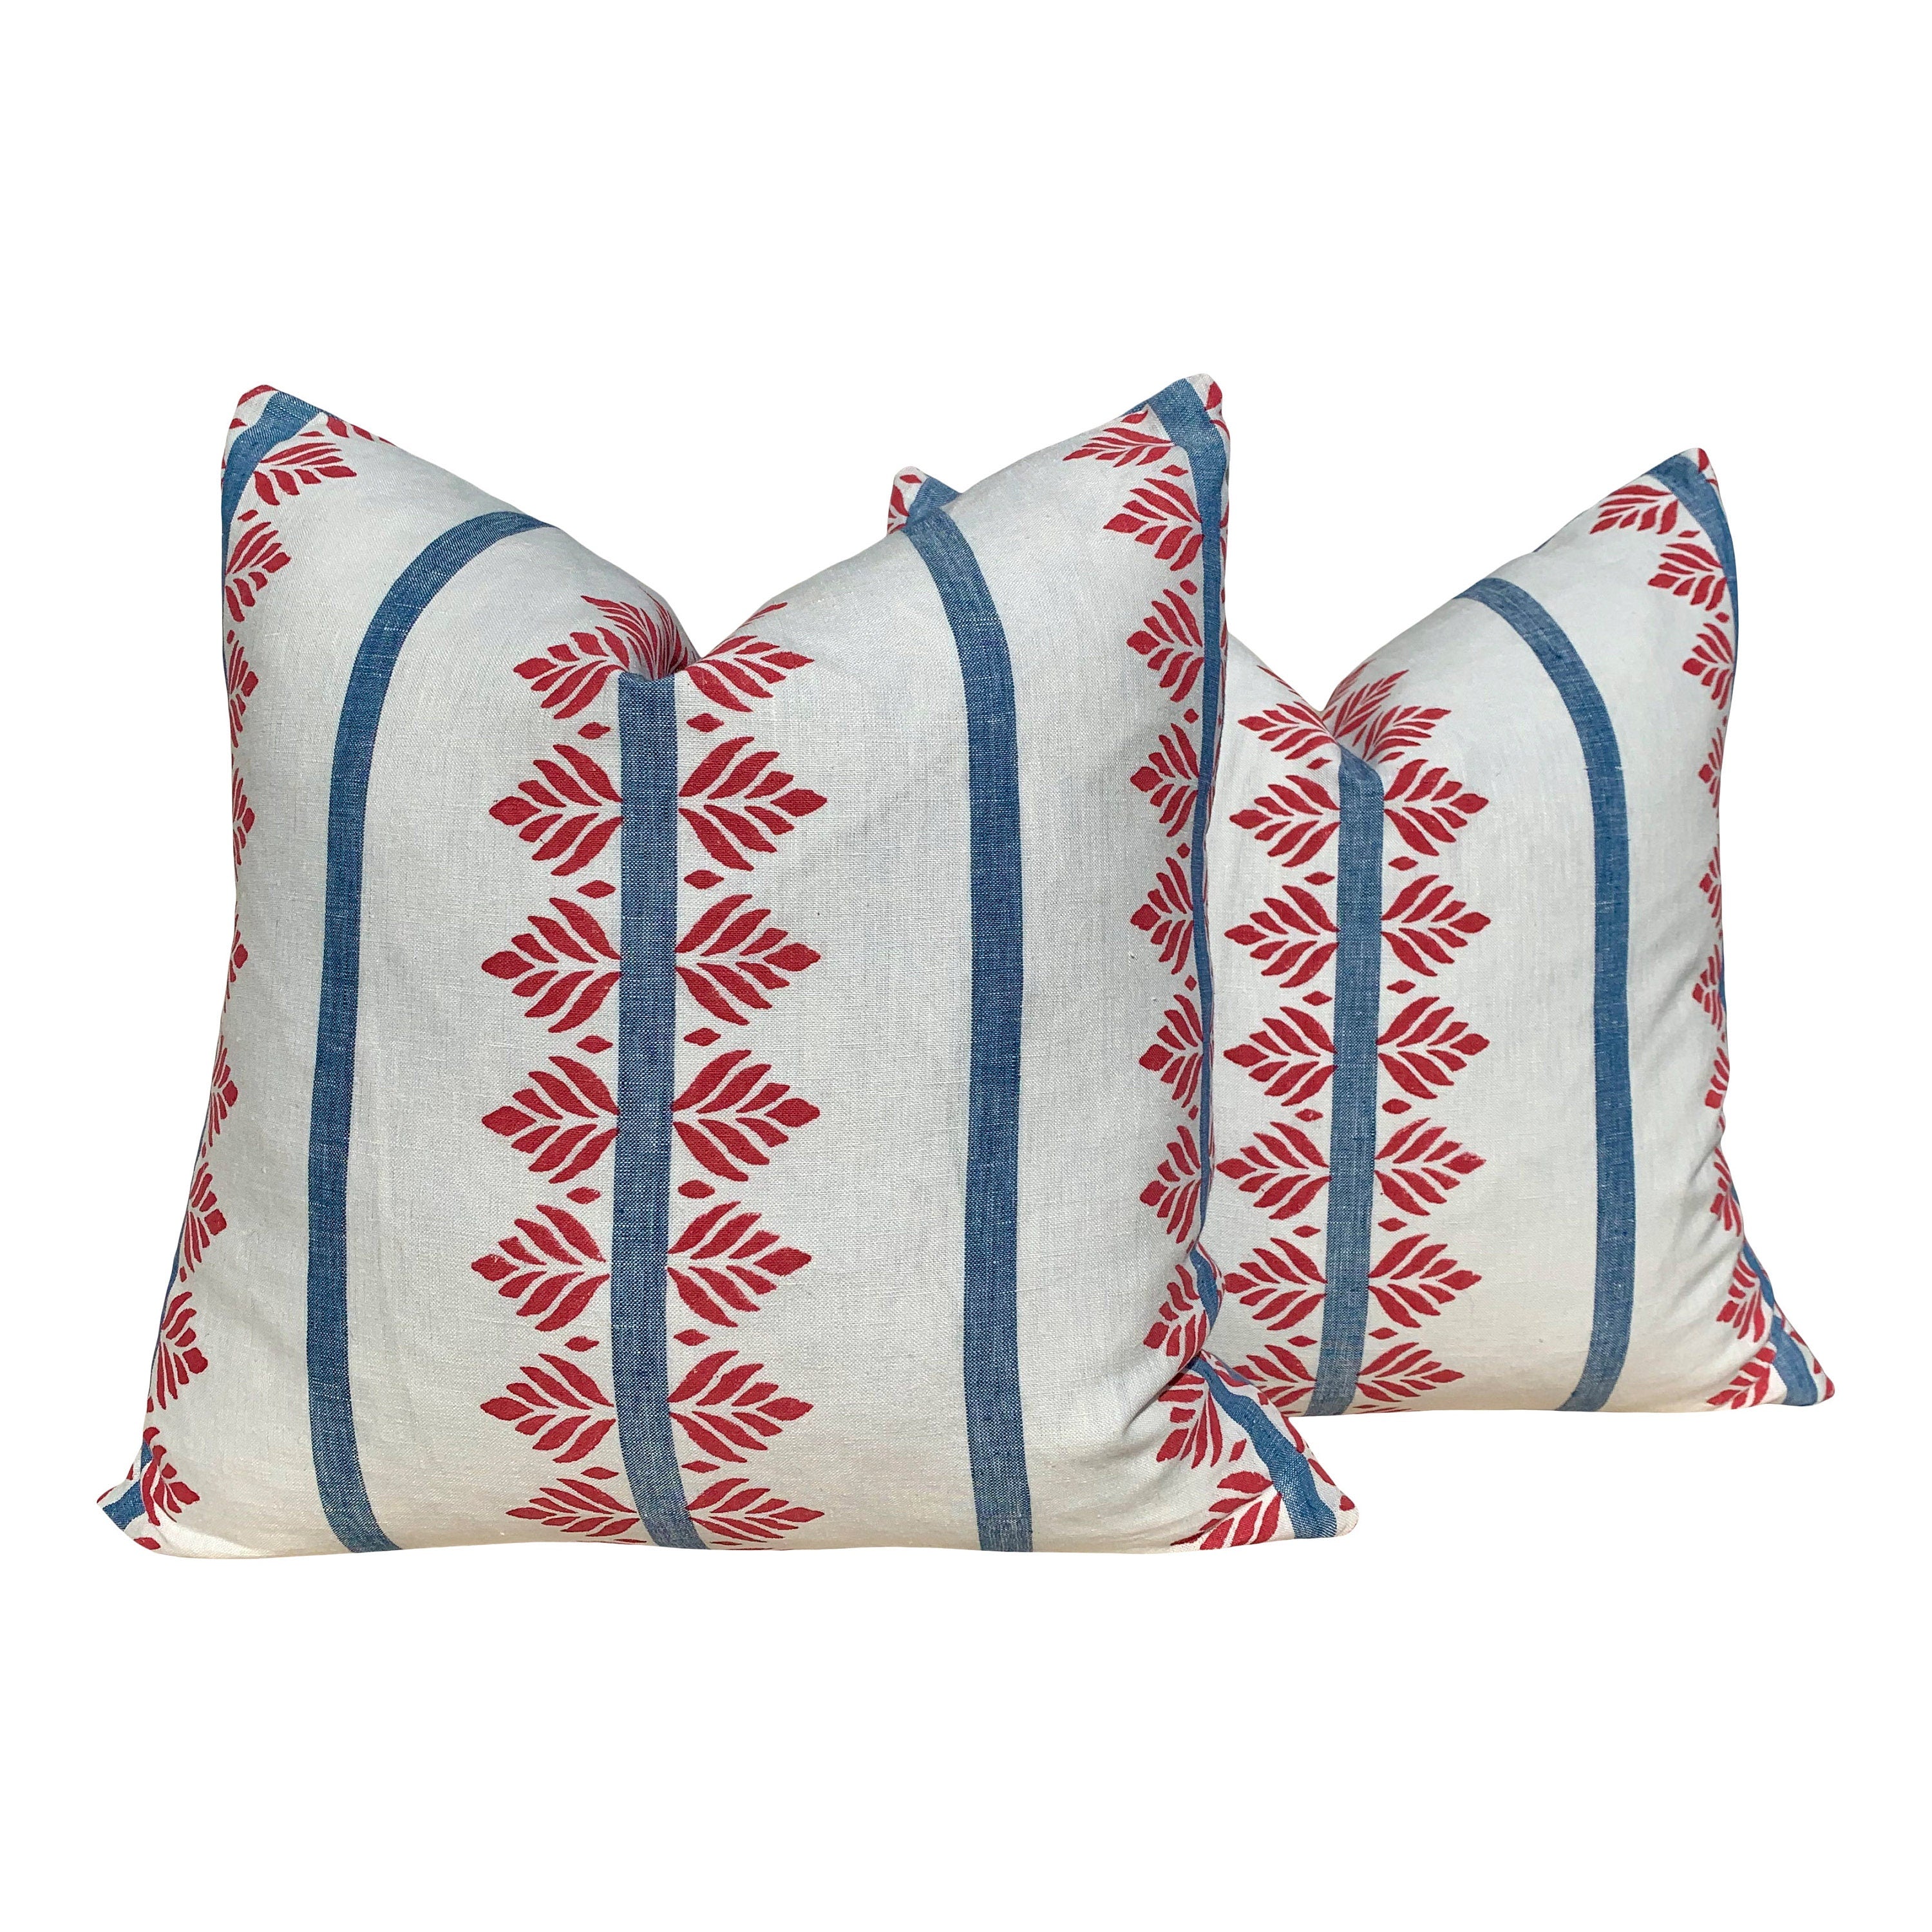 Designer Fern Stripe Pillow in Blue and Red. Accent Stripe Pillow, Decorative Pillow Cover, Designer Throw Pillow, Designer Lumbar Pillow